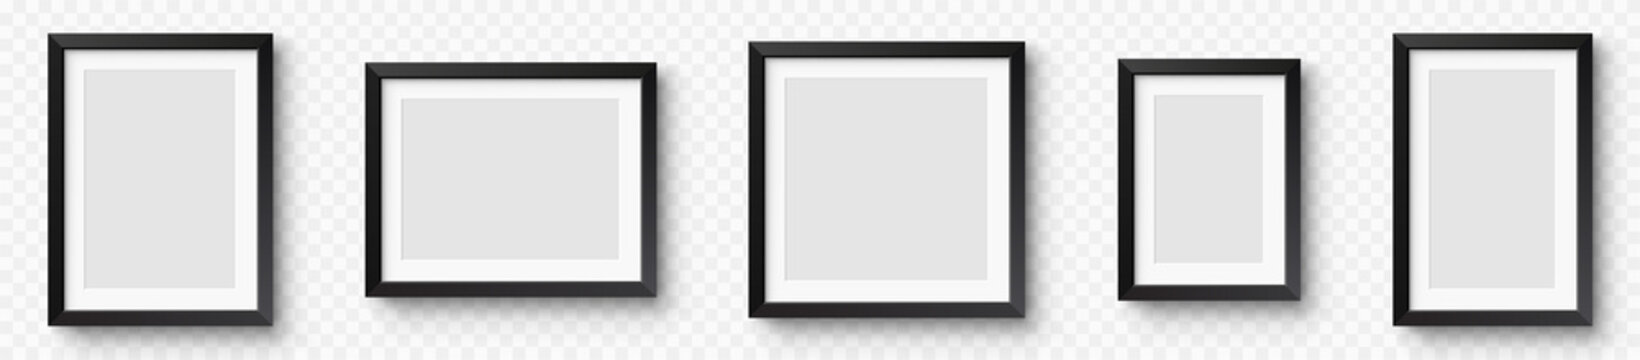 Realistic picture frame set. Collection mockup wall photo frames. Picture frames set with shadow. Photo frame with black borders - stock vector.